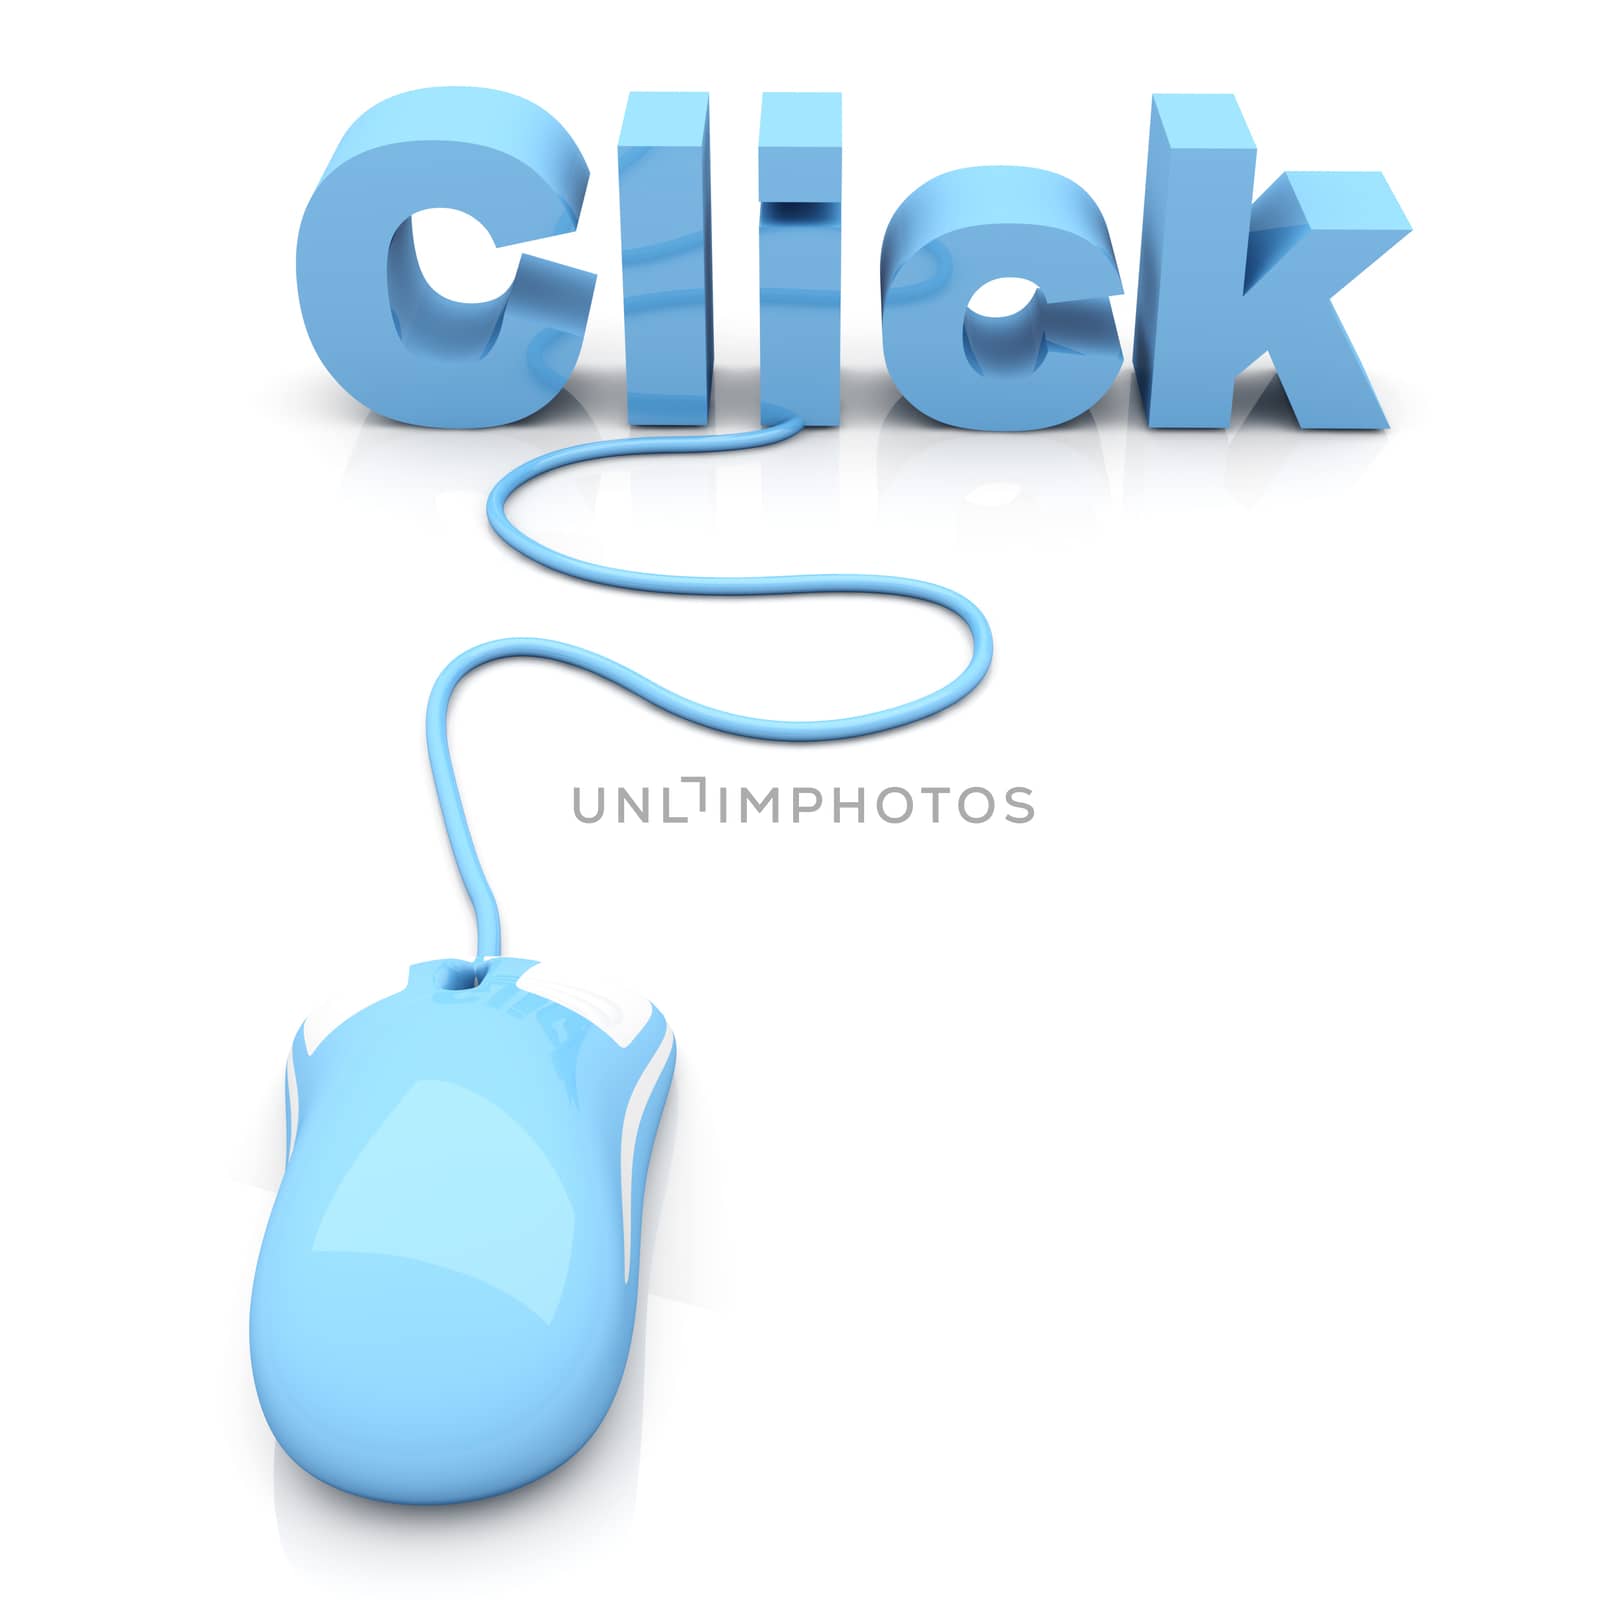 Click online. 3D rendered Illustration. Isolated on white.